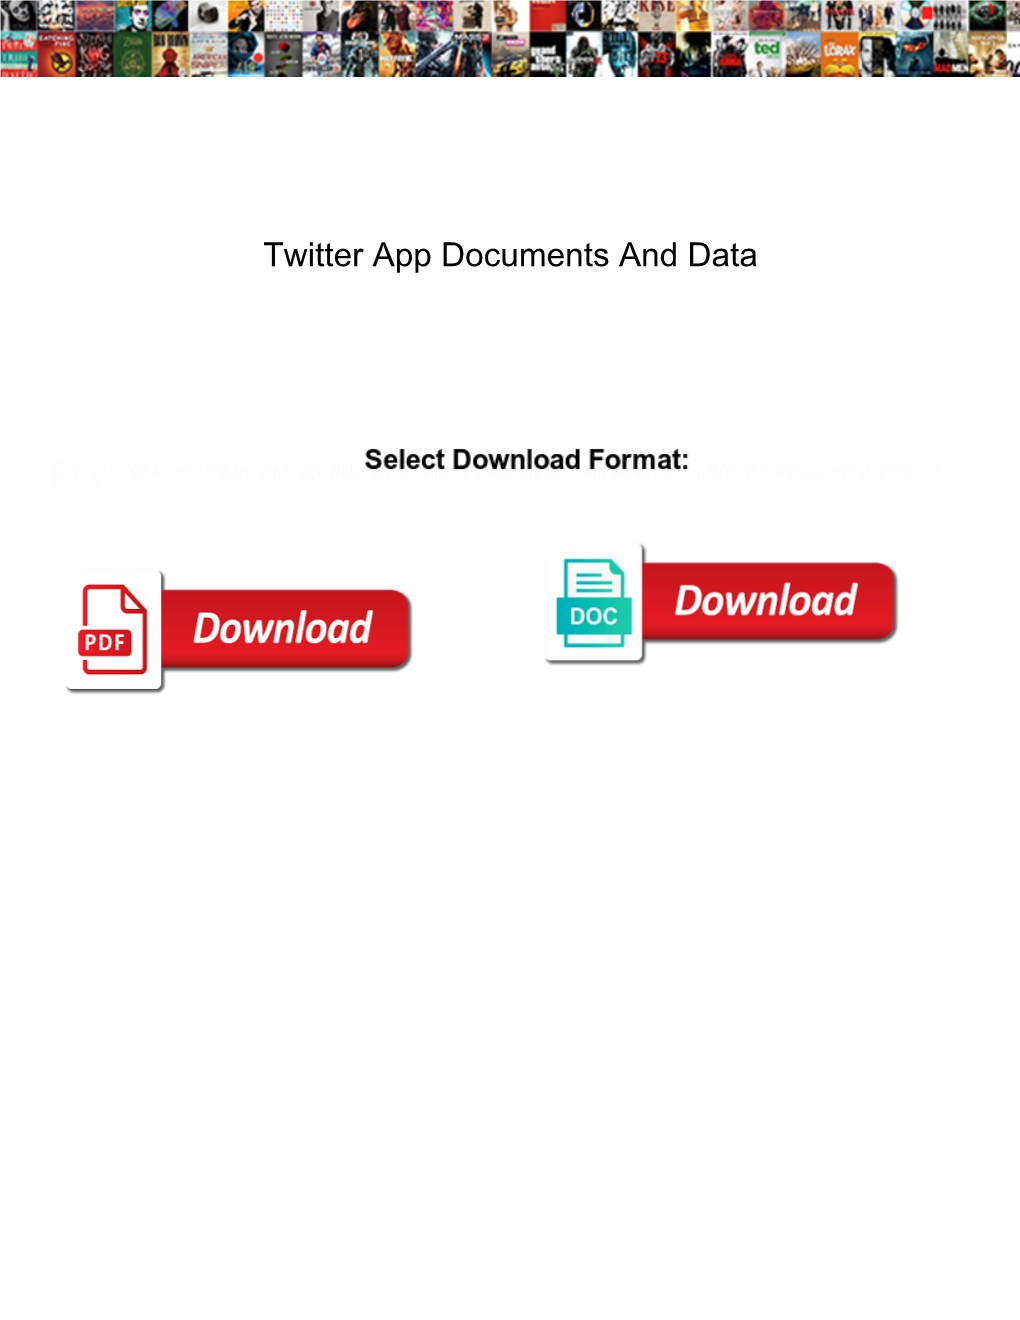 Twitter App Documents and Data